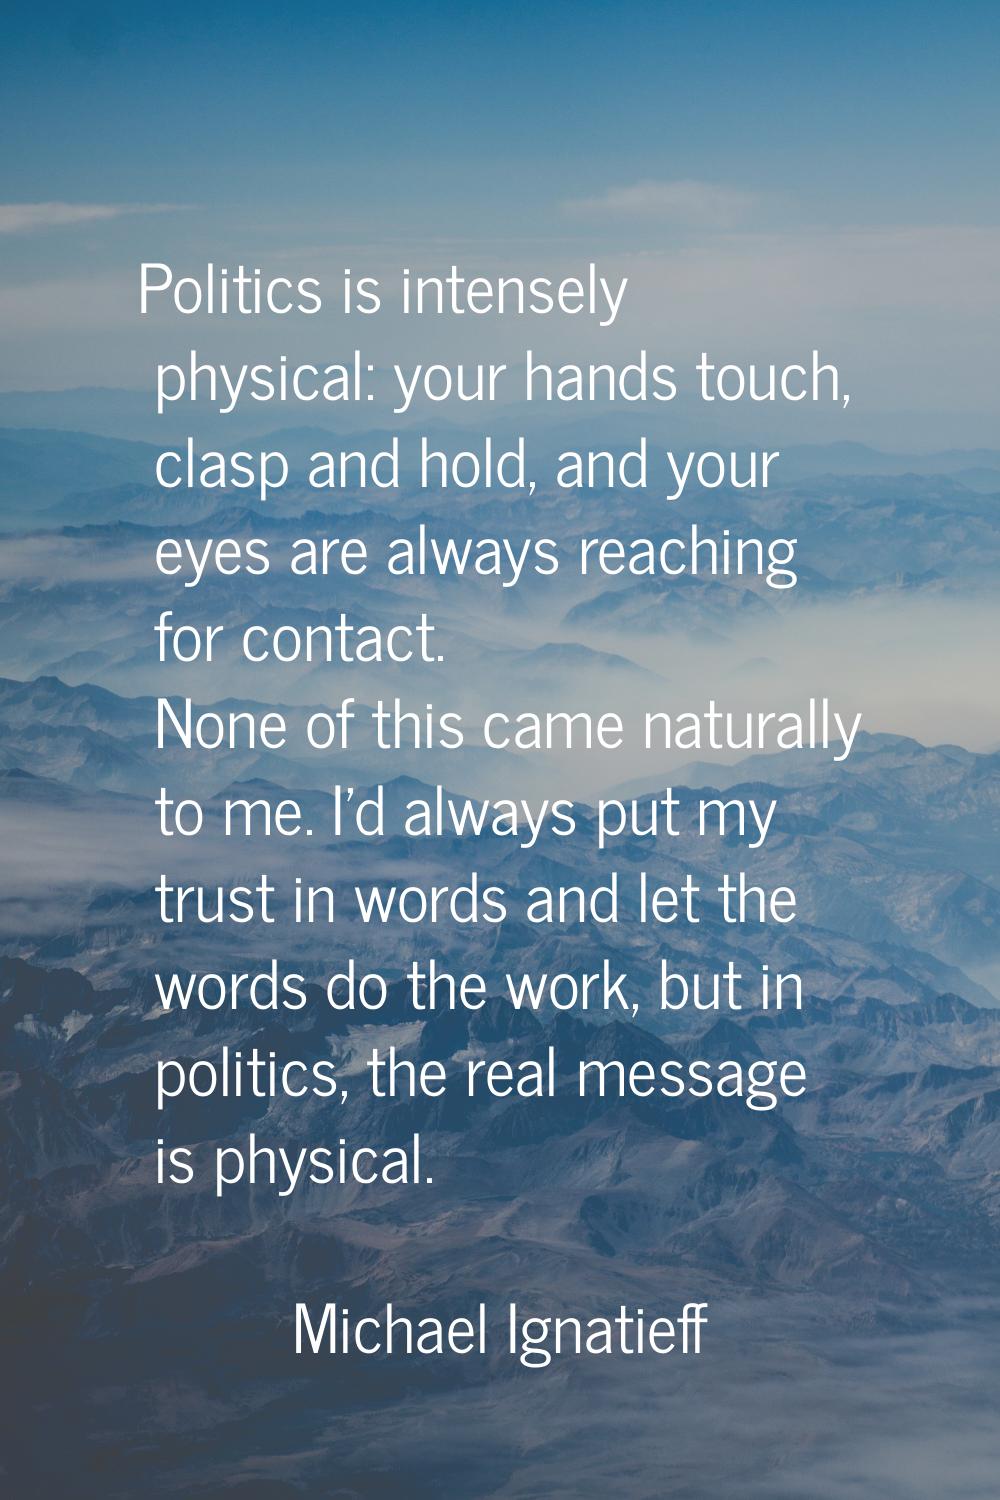 Politics is intensely physical: your hands touch, clasp and hold, and your eyes are always reaching